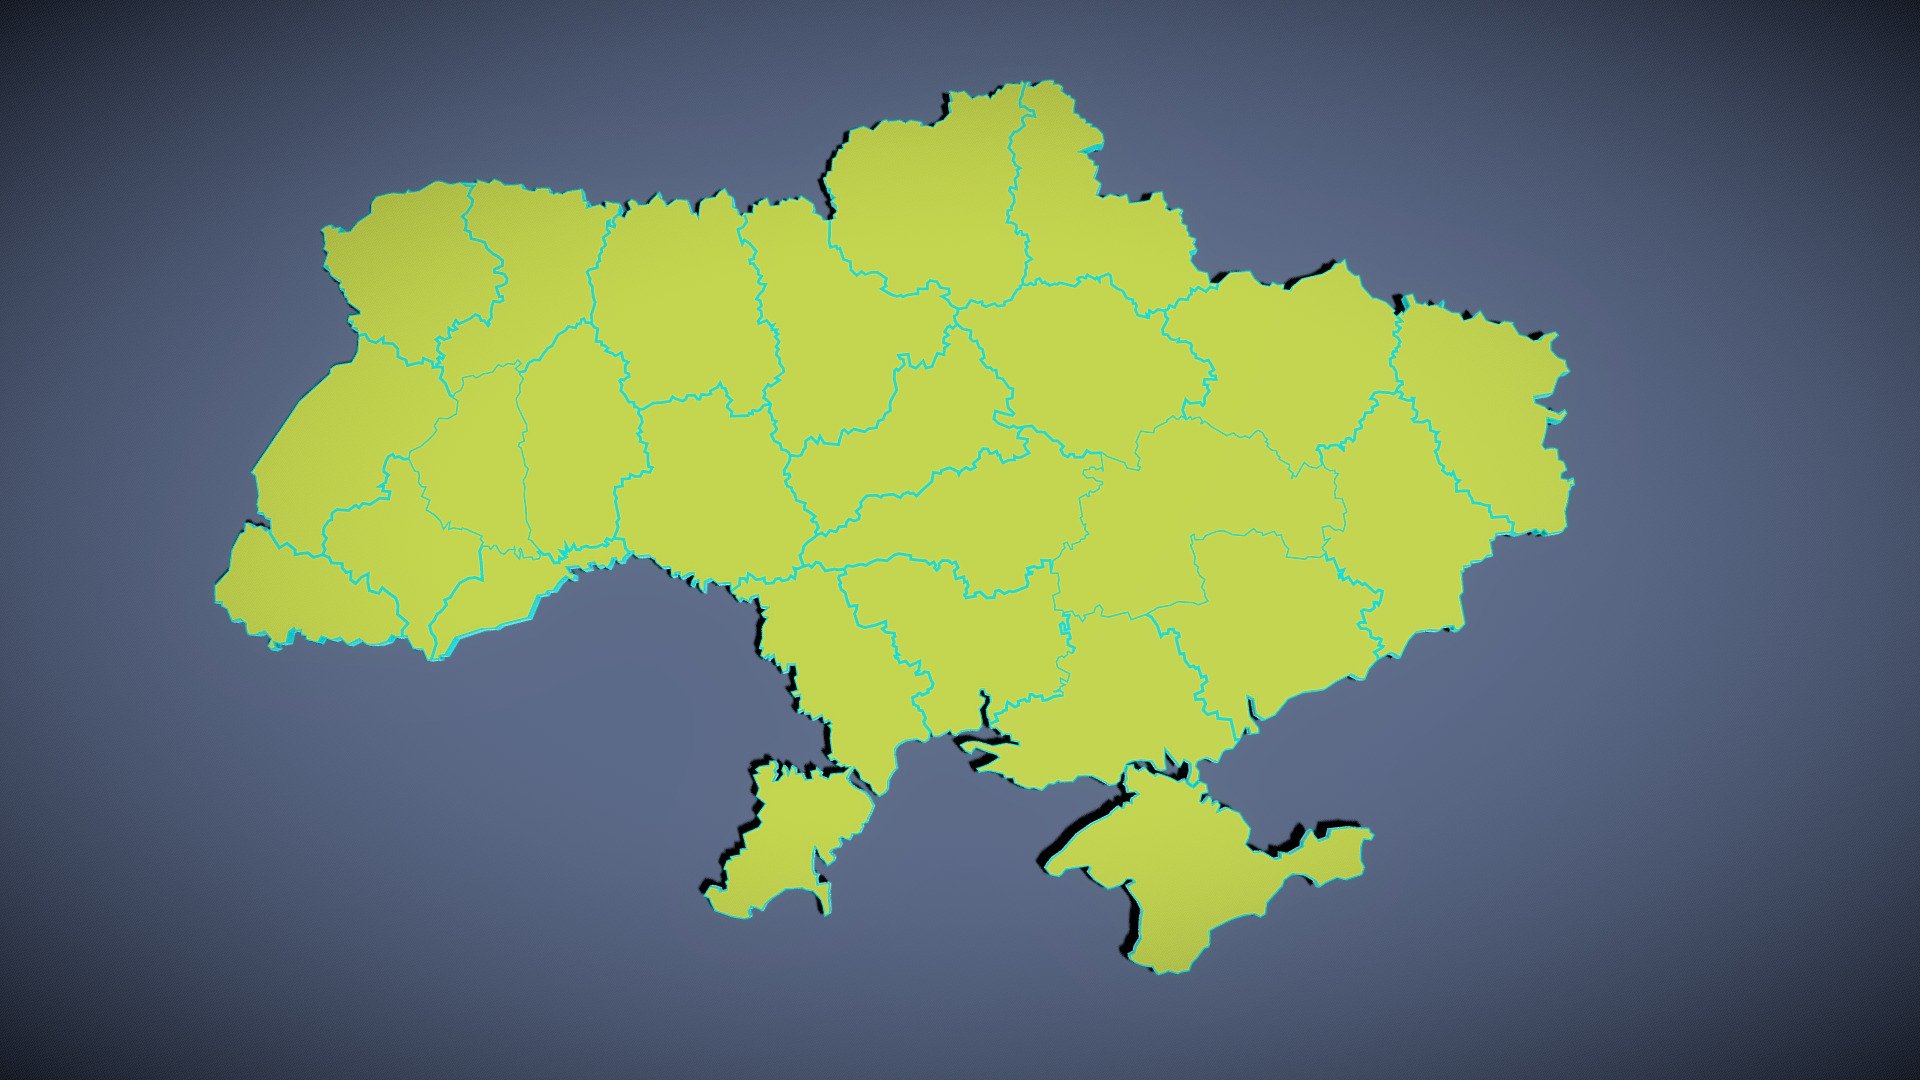 *UKRAINE POLITICAL MAP LAYOUT *  (pre war)

Model made with Blender 2.90.

Good clean topology.

Easy to deform.

Print ready.

Materials applied as seen on renders.

Each county as separate object.

Subdivision ready.

All named correctly 3d model